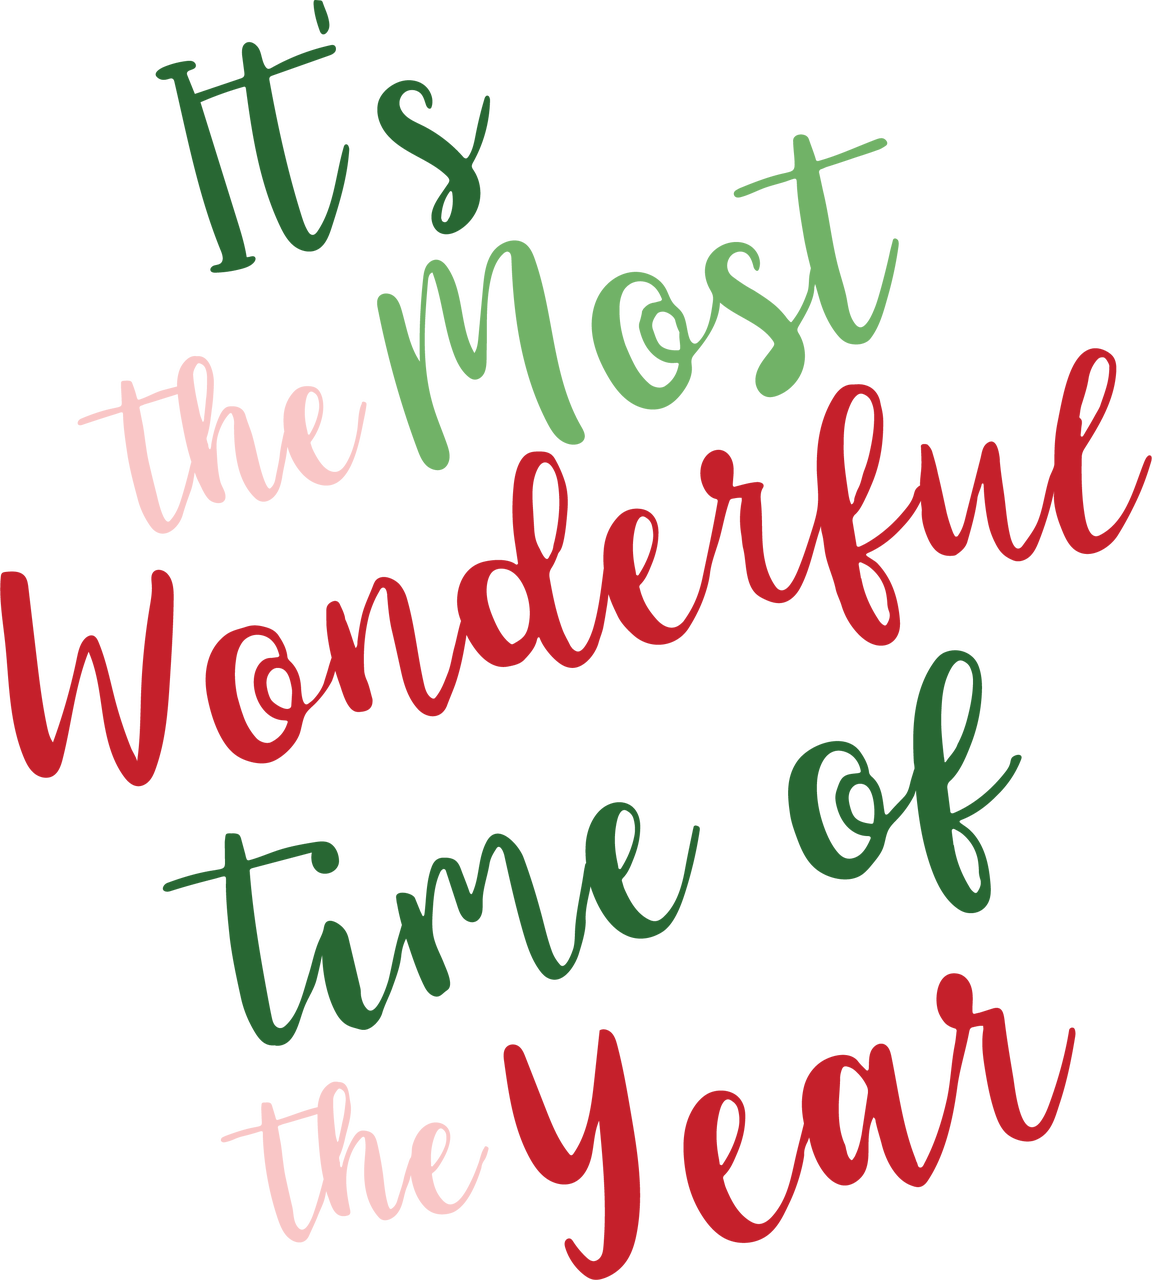 It's the Most Wonderful Time of the Year SVG Cut File